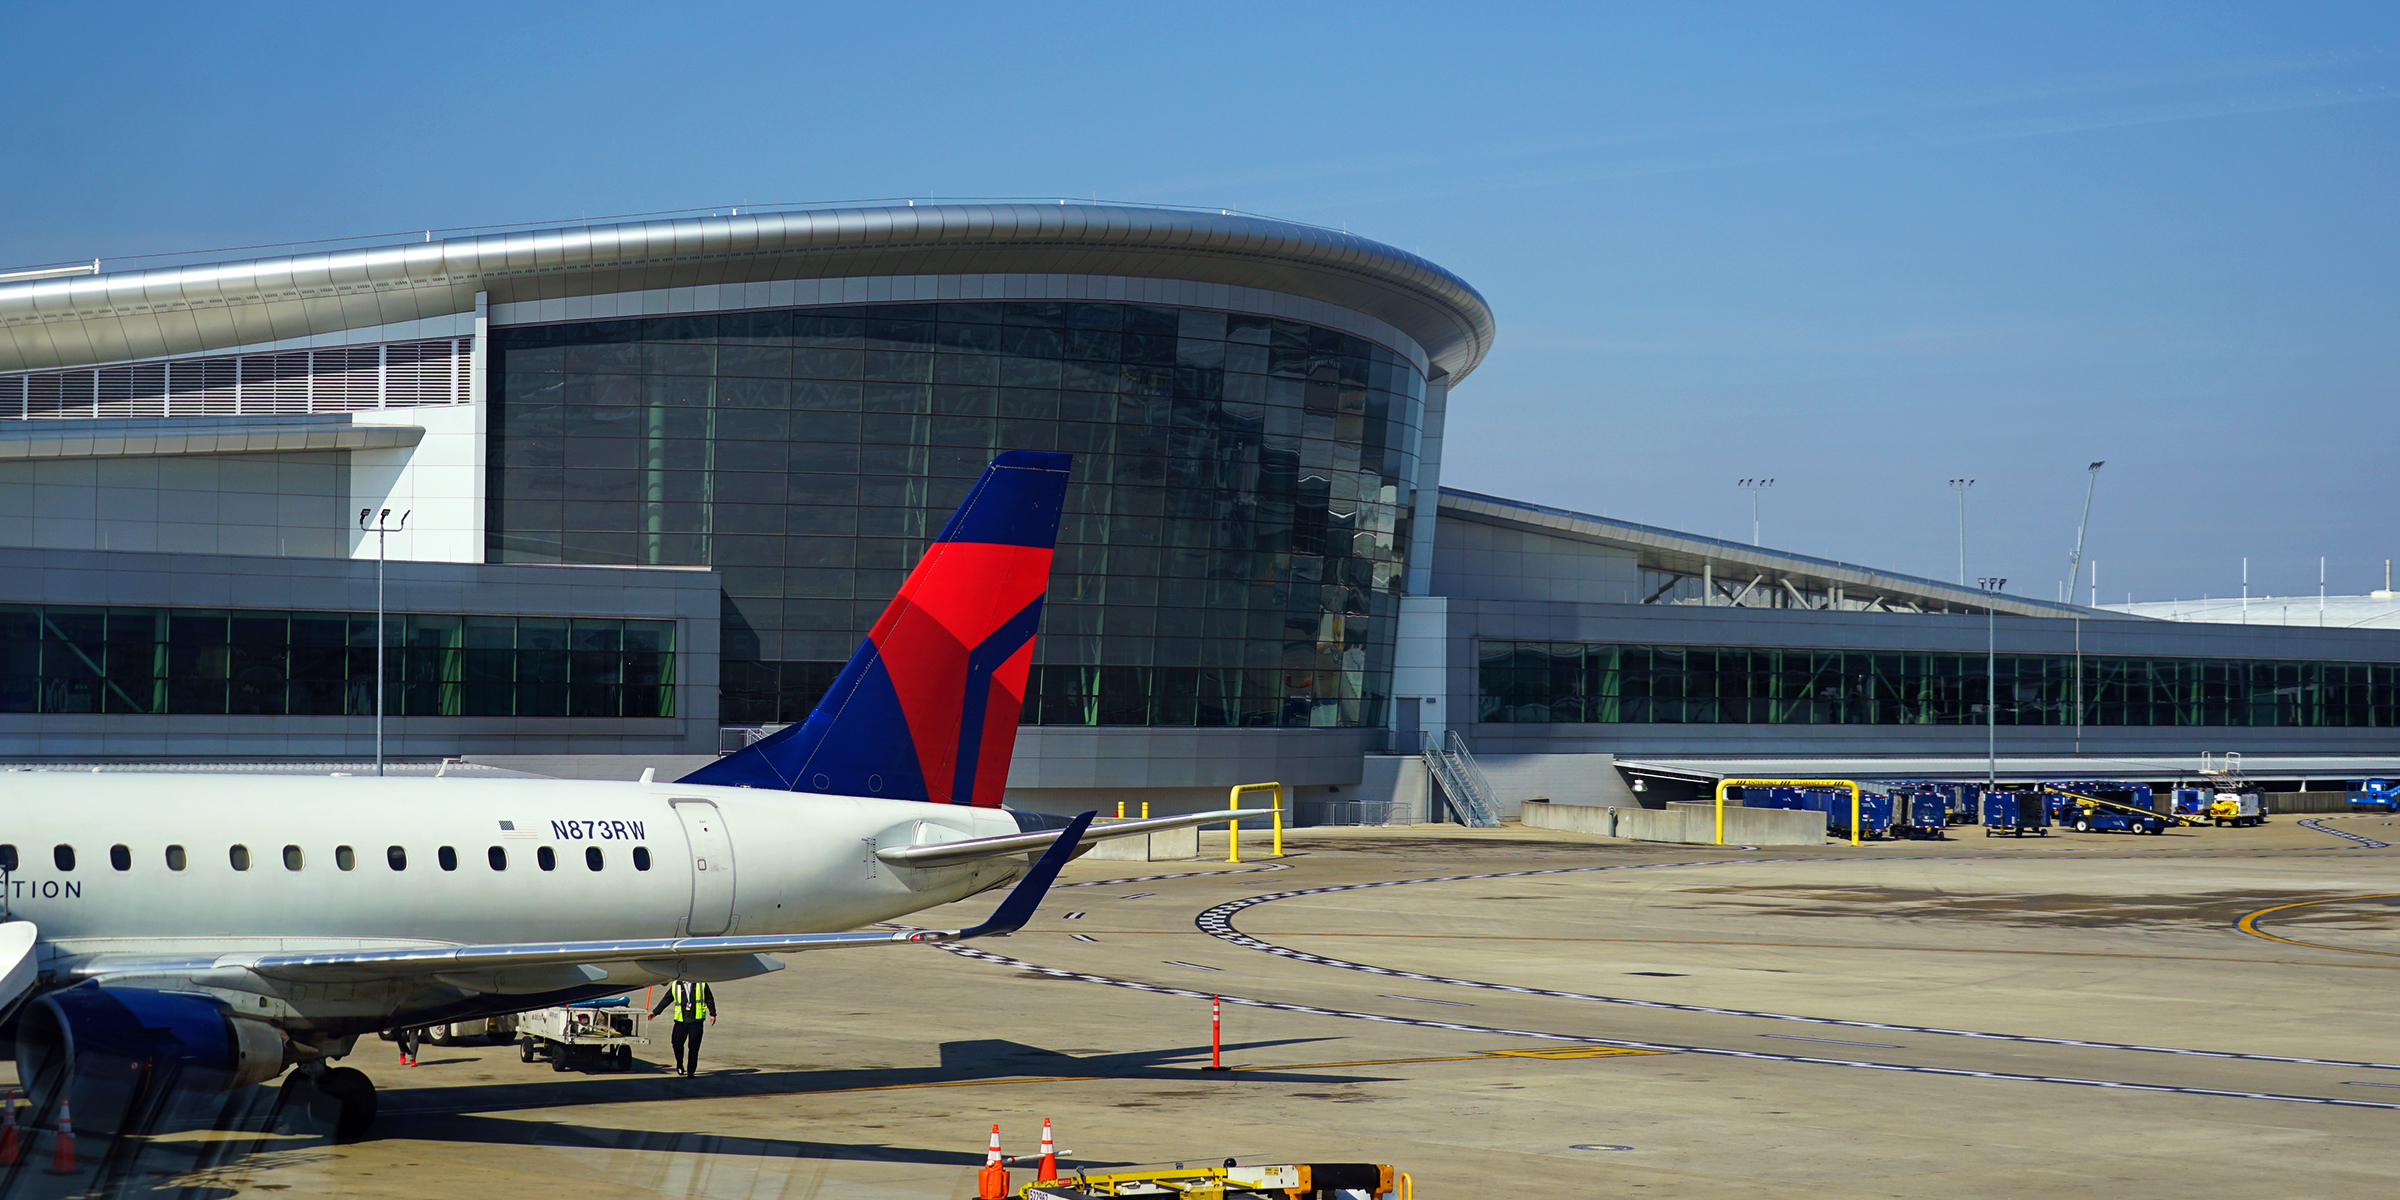 Indianapolis International Airport | Source: Shutterstock